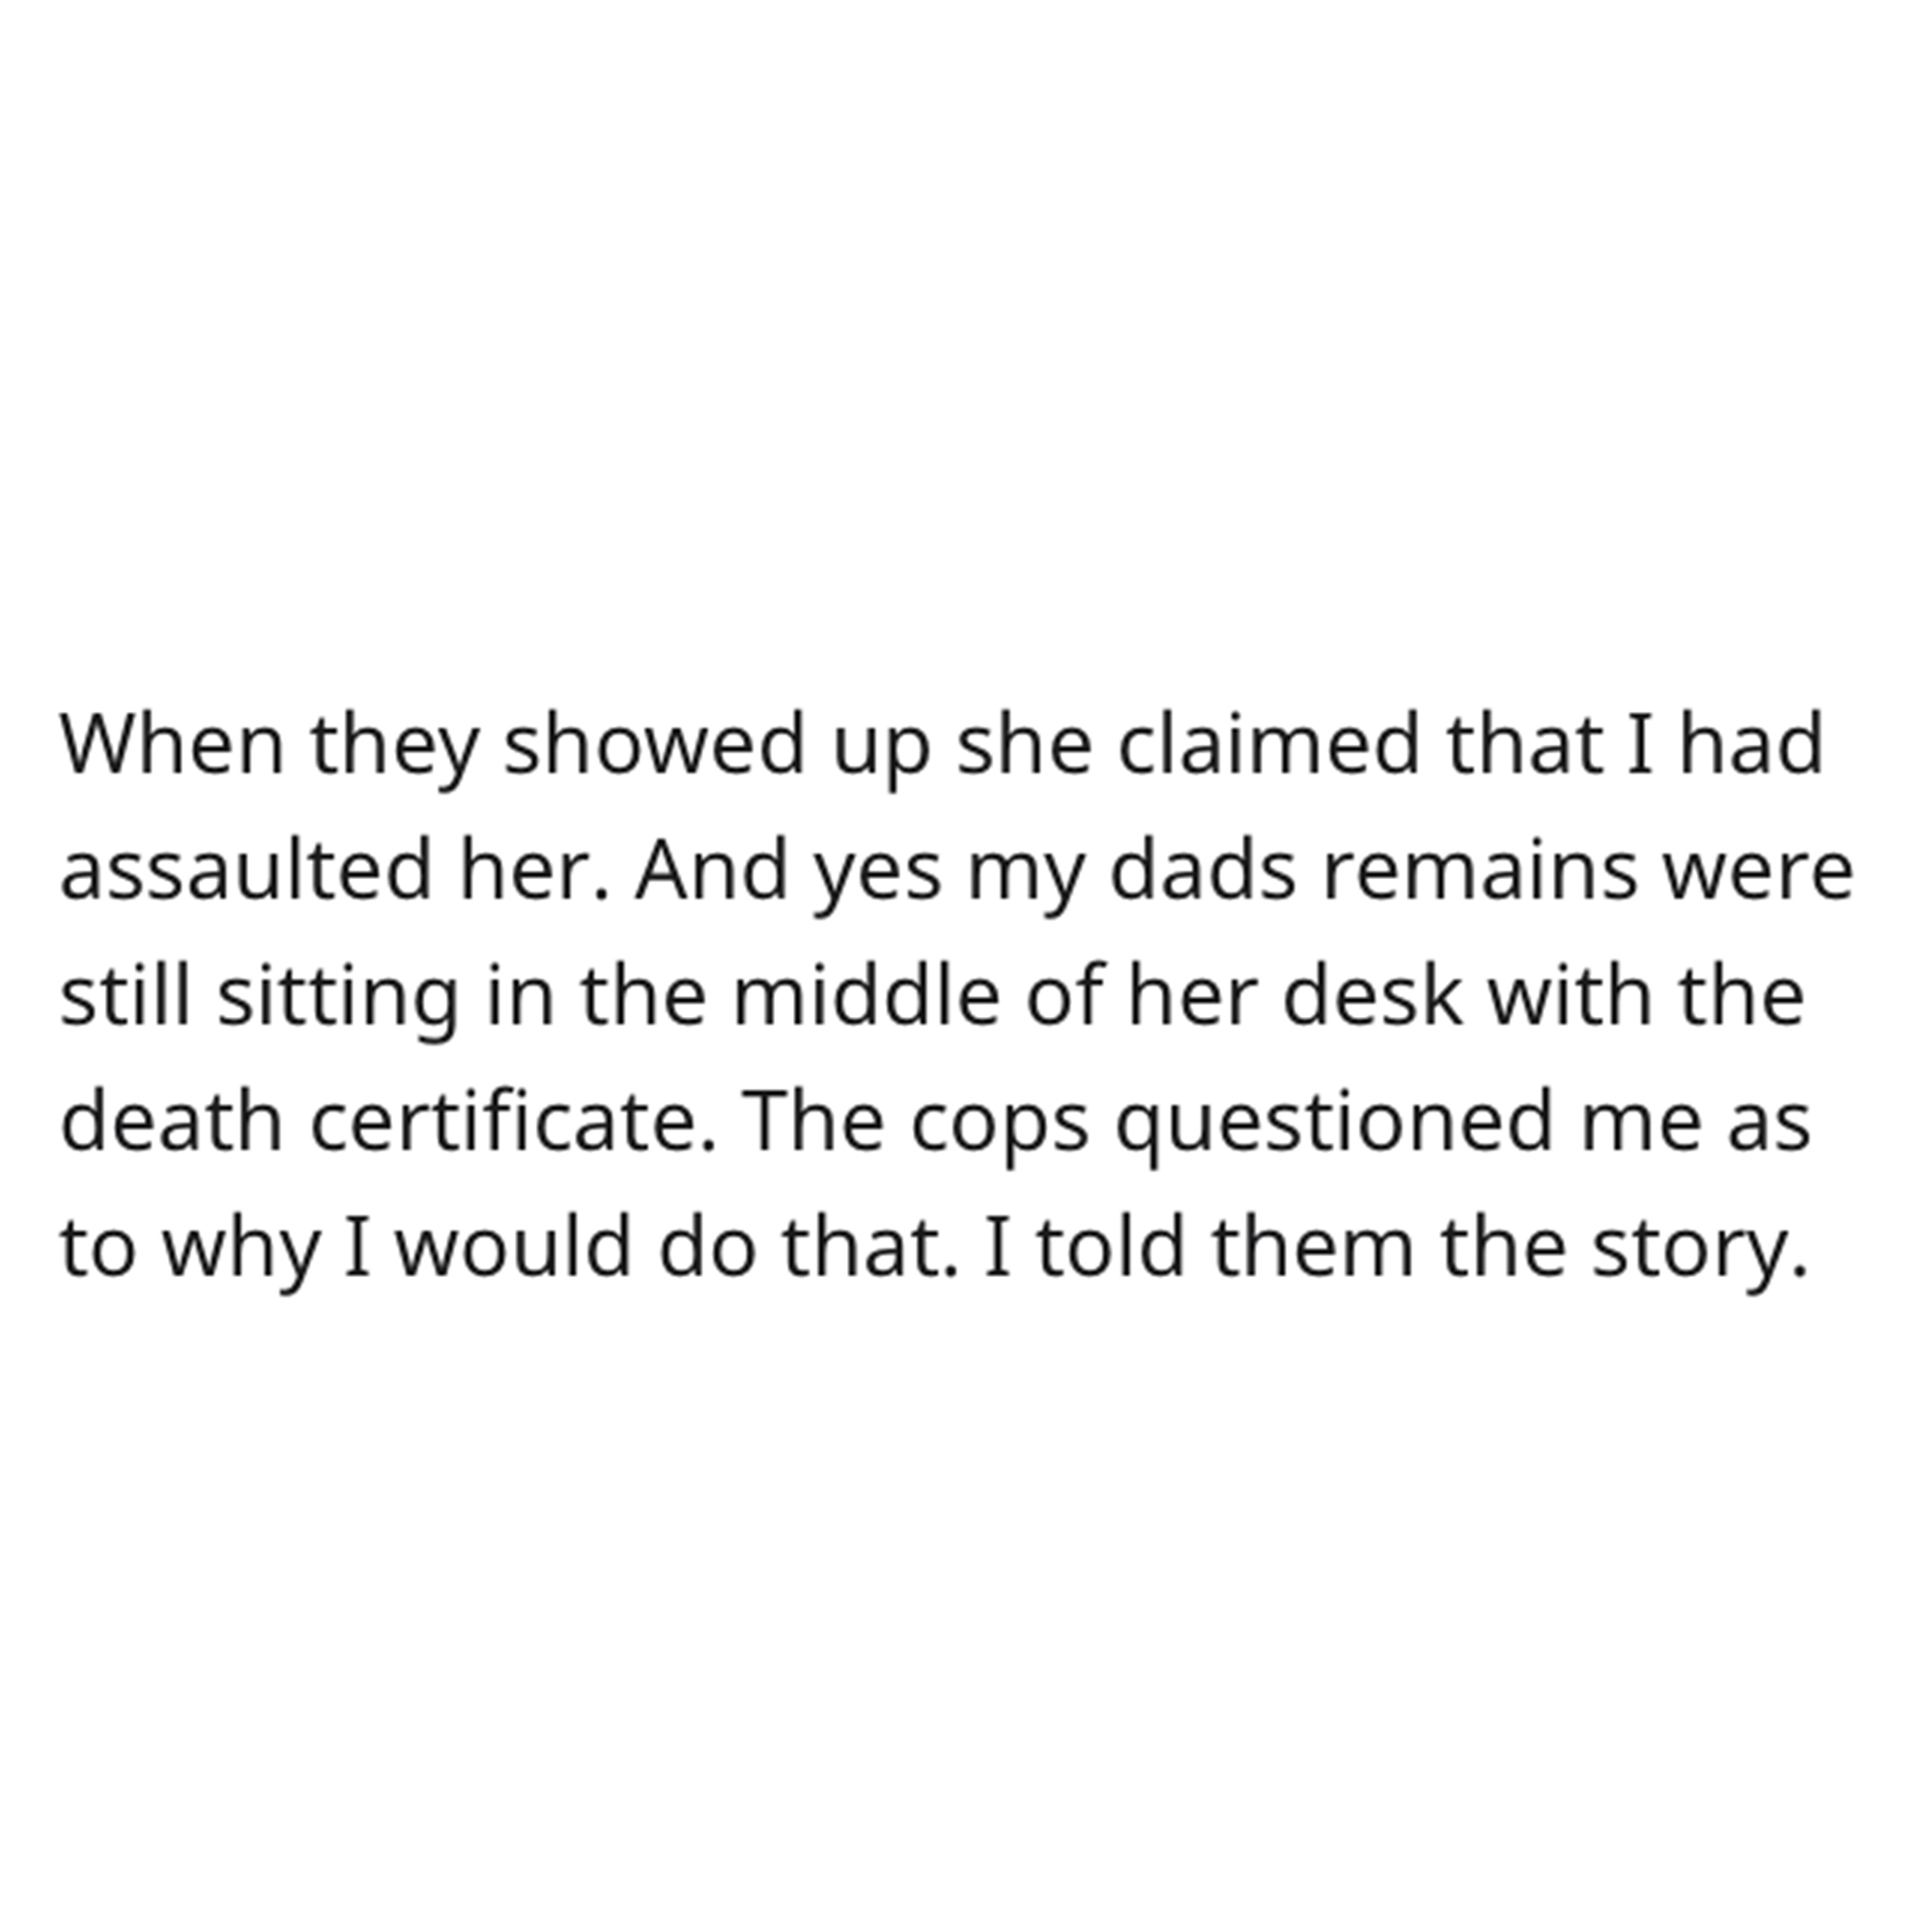 Dead Dad revenge story - pieces sum 41 - When they showed up she claimed that I had assaulted her. And yes my dads remains were still sitting in the middle of her desk with the death certificate. The cops questioned me as to why I would do that. I told th